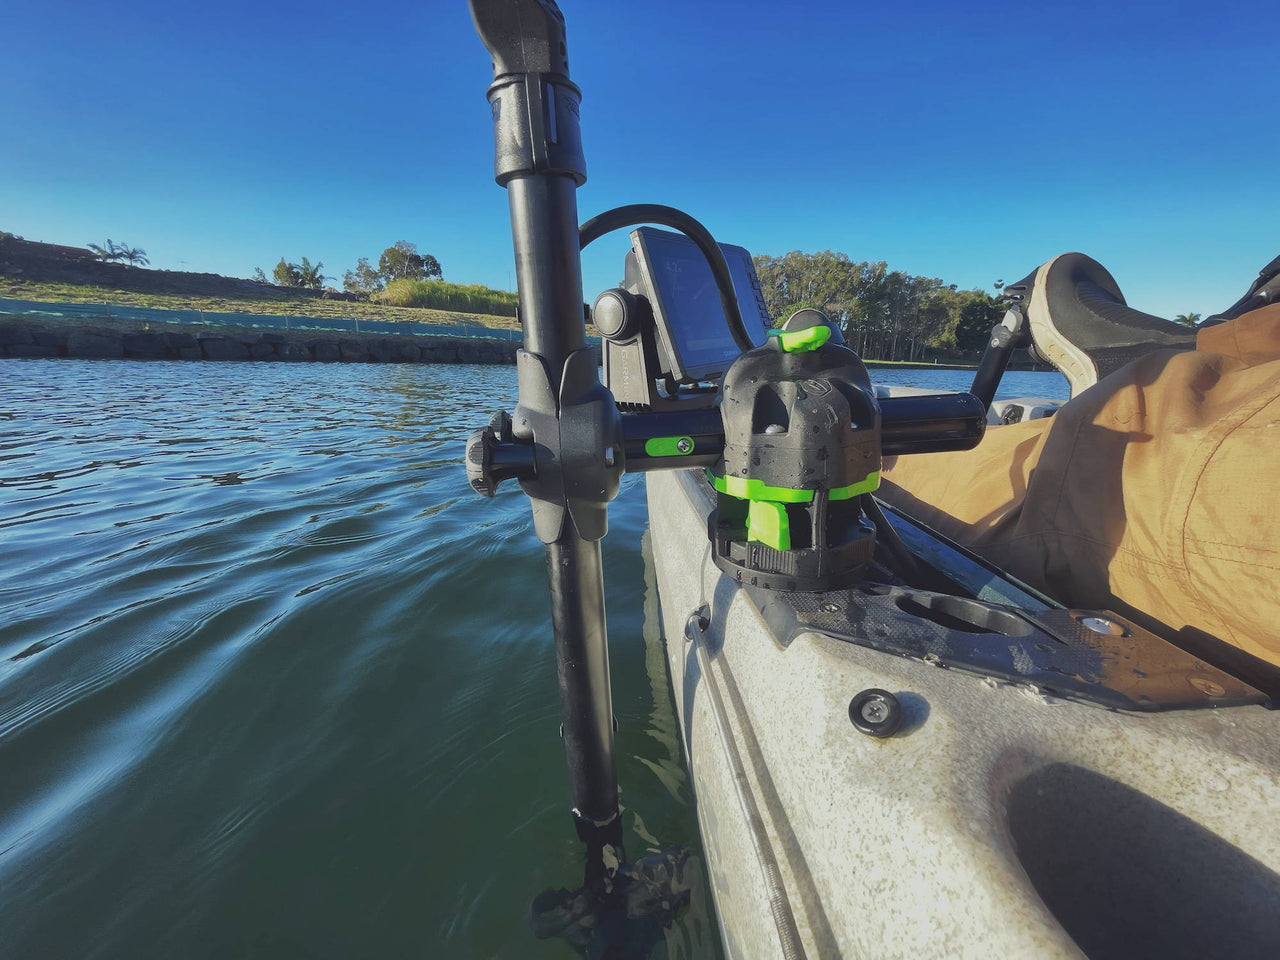 Fish Finder Mount and Rod Holder for inflatable boat